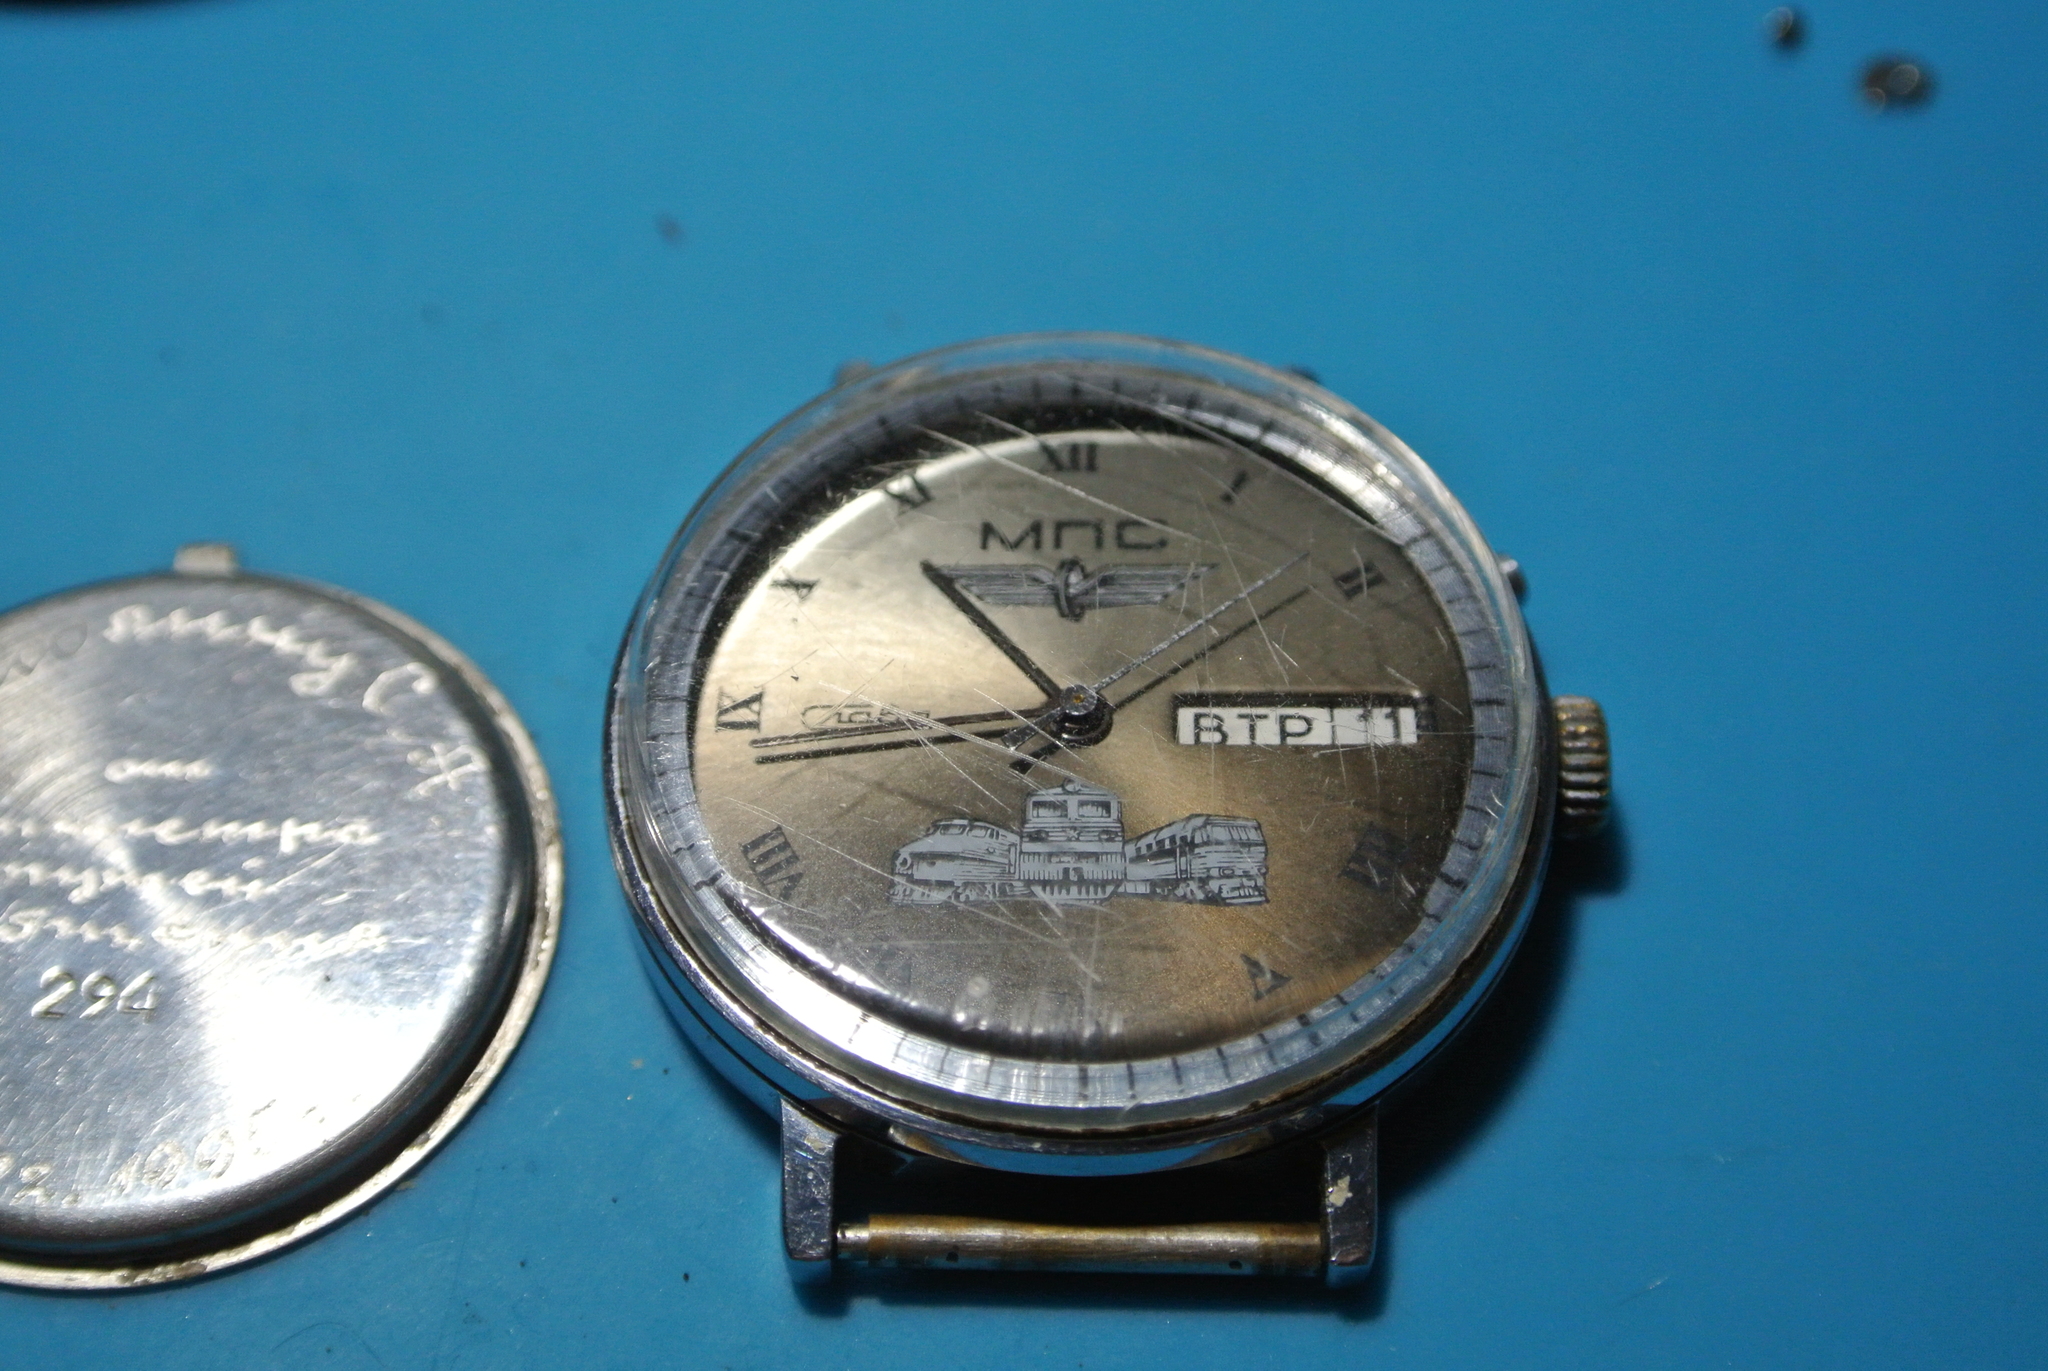 Gift from the Minister of Railways - My, Clock, Wrist Watch, Hobby, Repair, Moscow, cat, Joy, Longpost